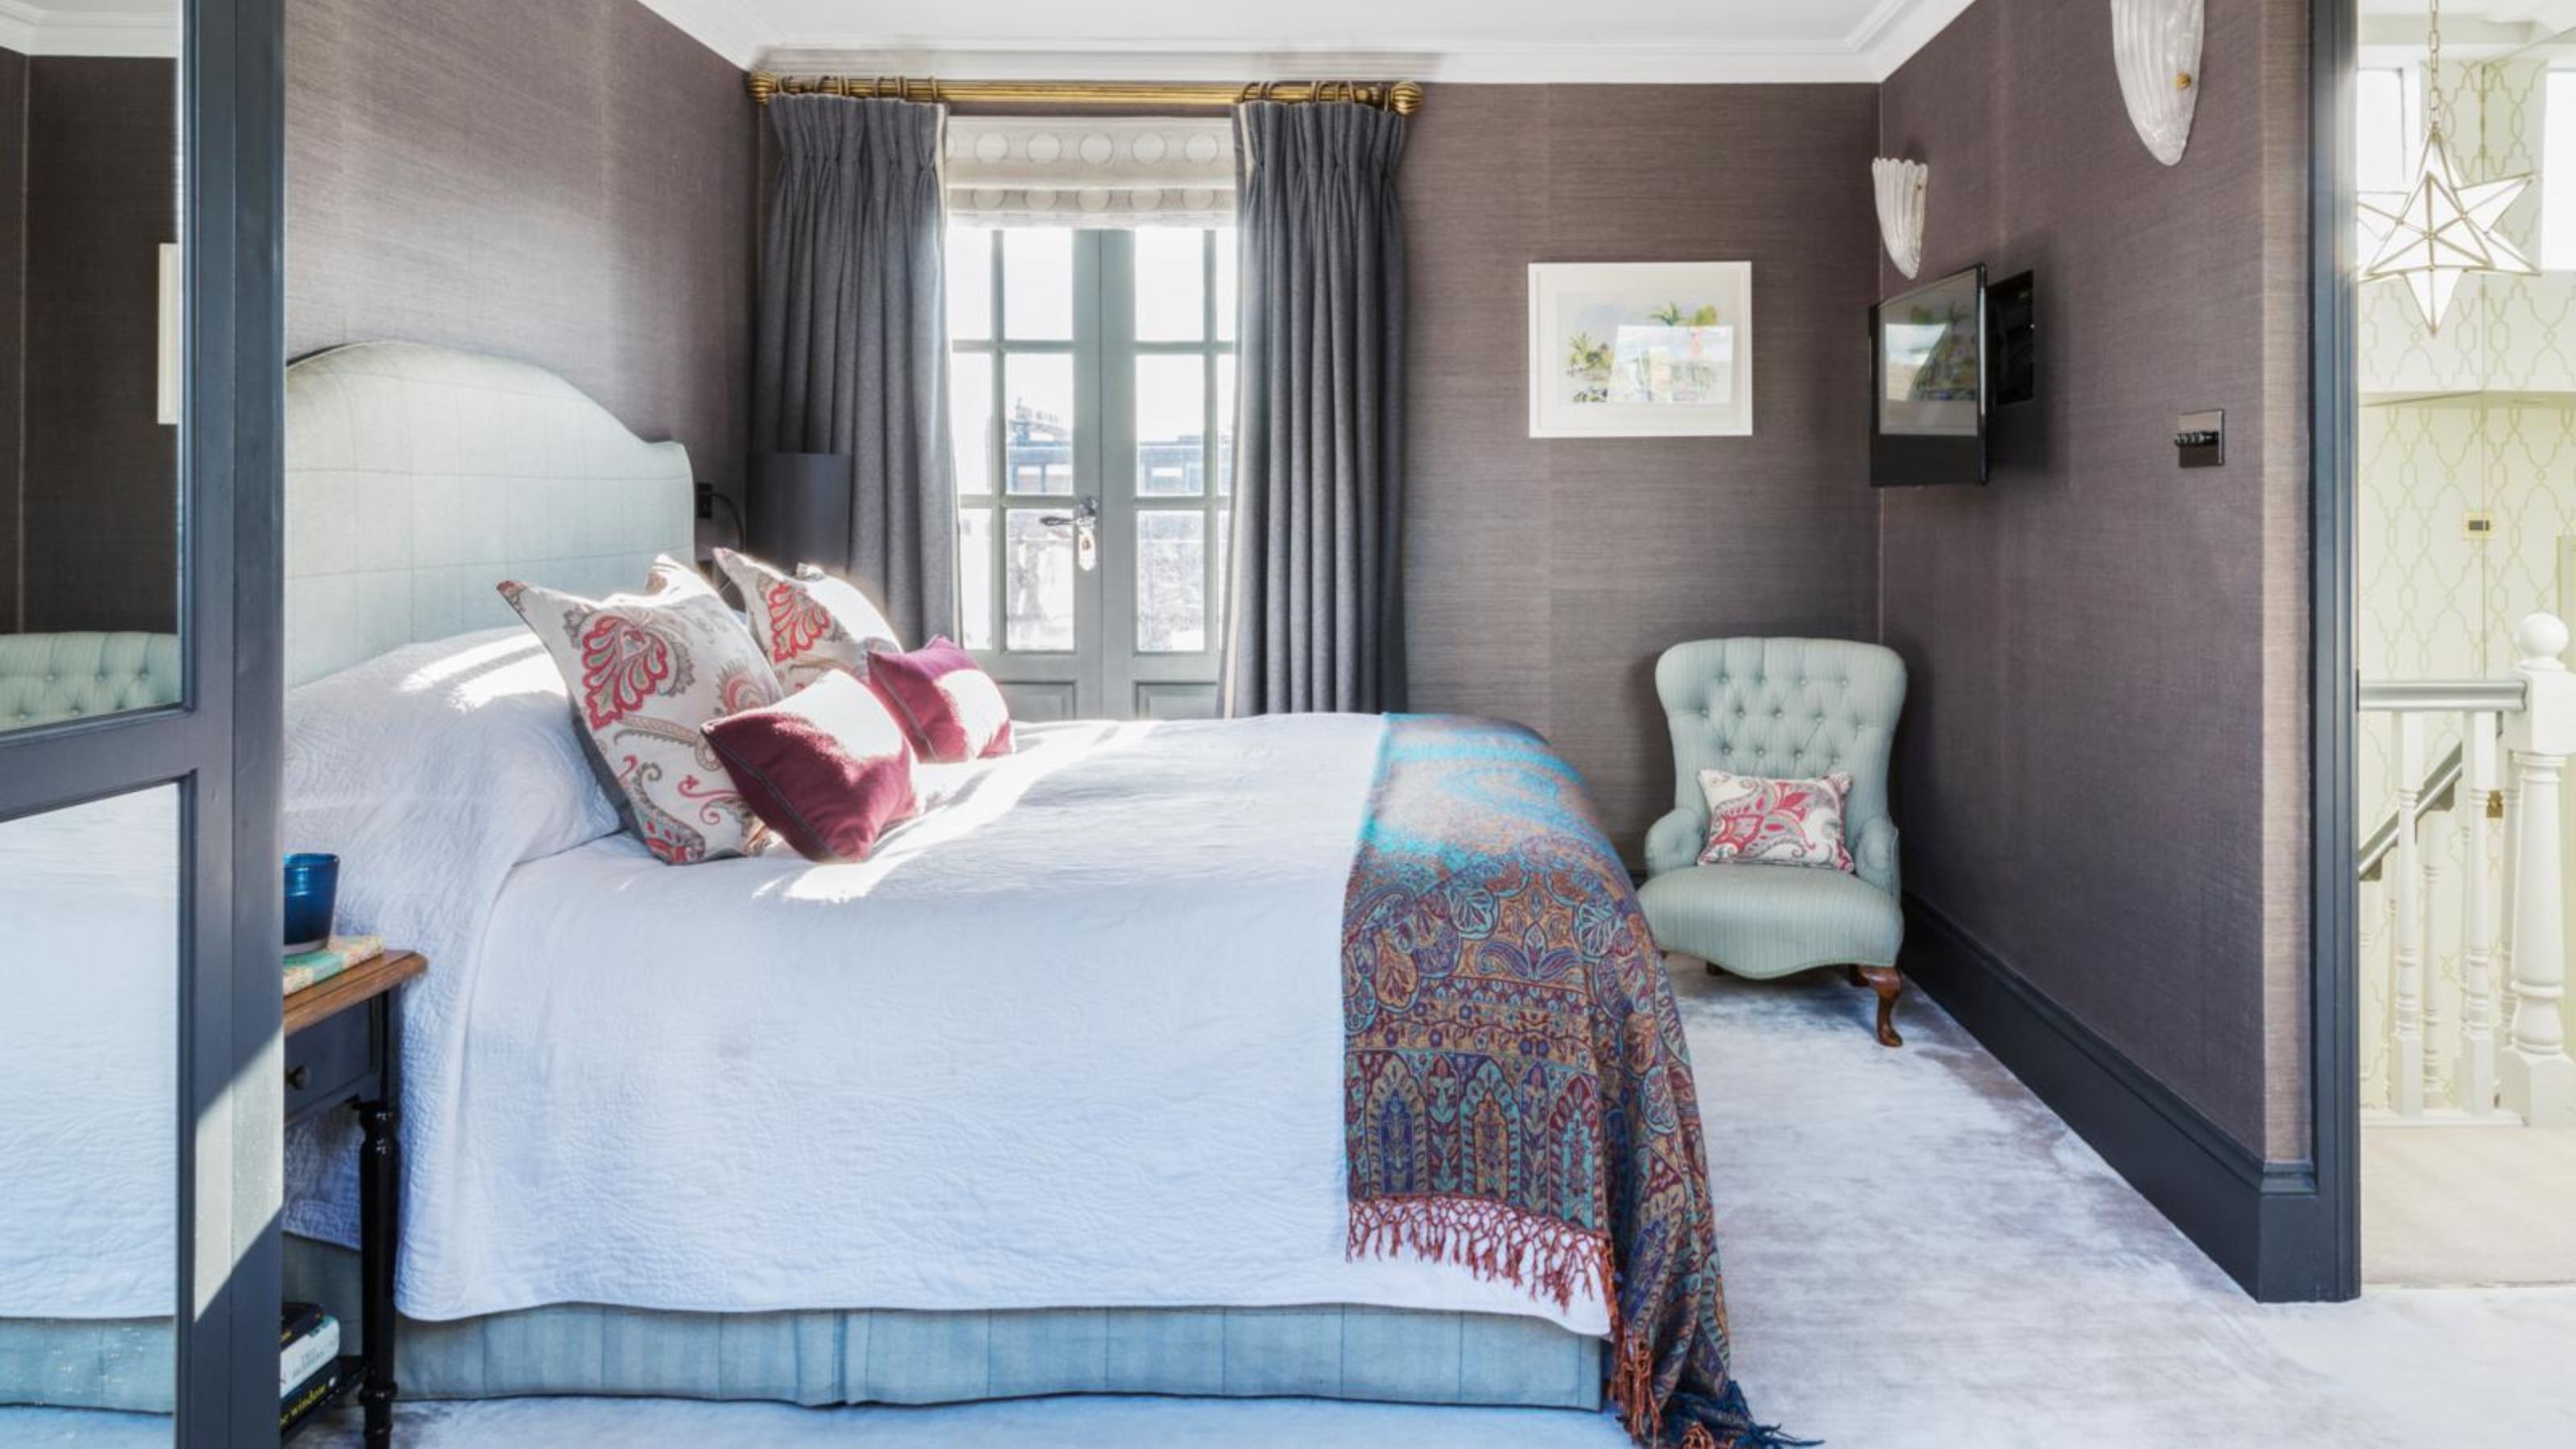 Do queen sheets fit a full bed? Answers from bedding experts